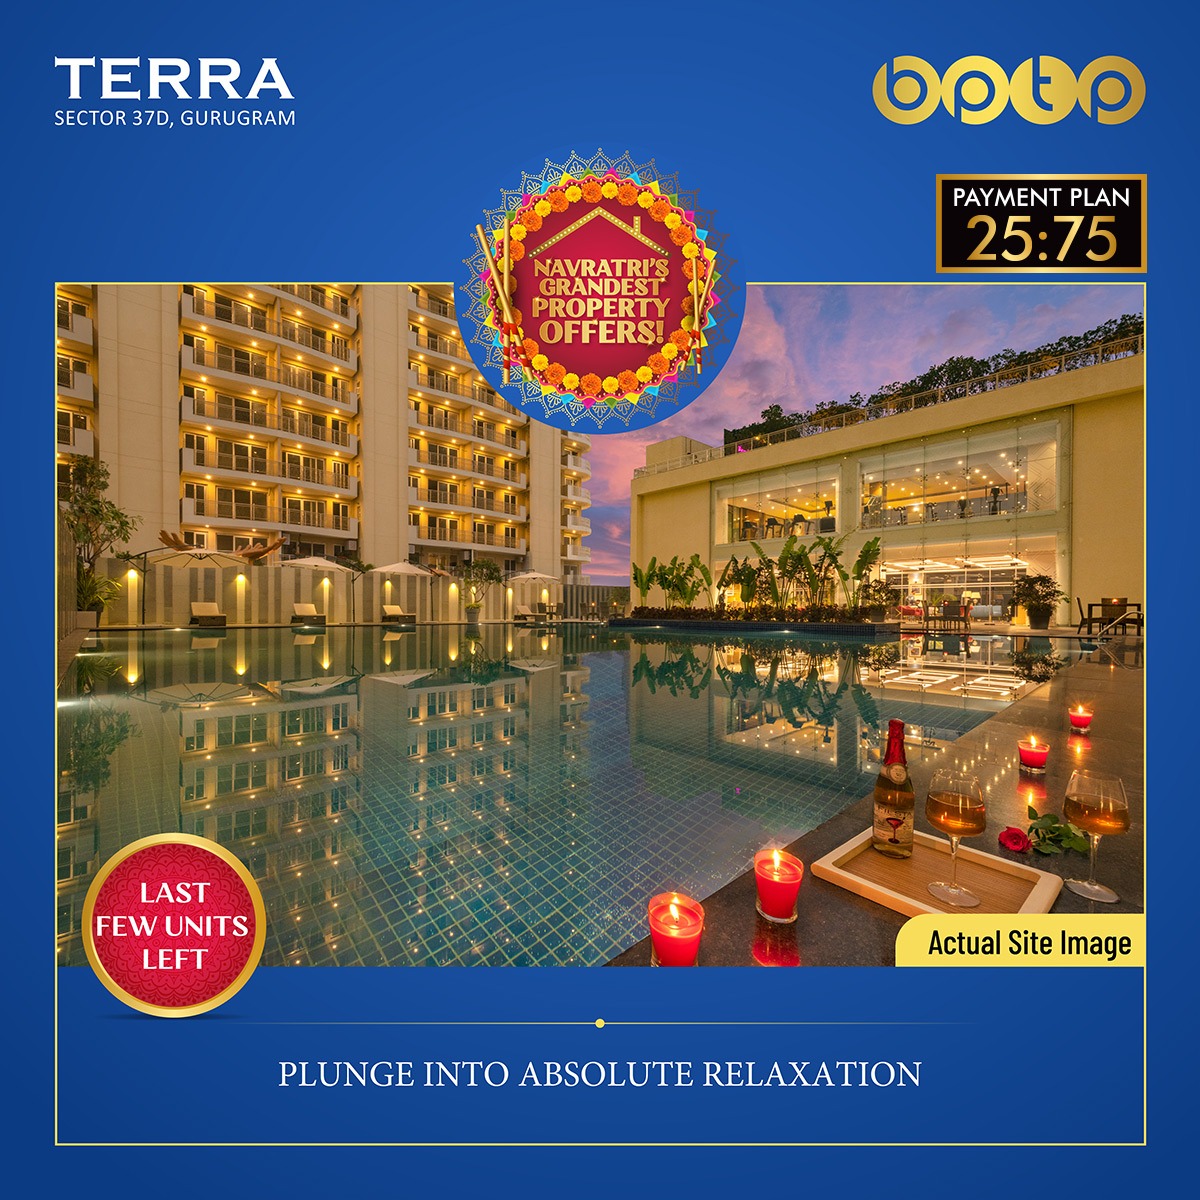 Navratri grandest property offers 25:75 payment plan at BPTP Terra in Sector 37D, Gurgaon